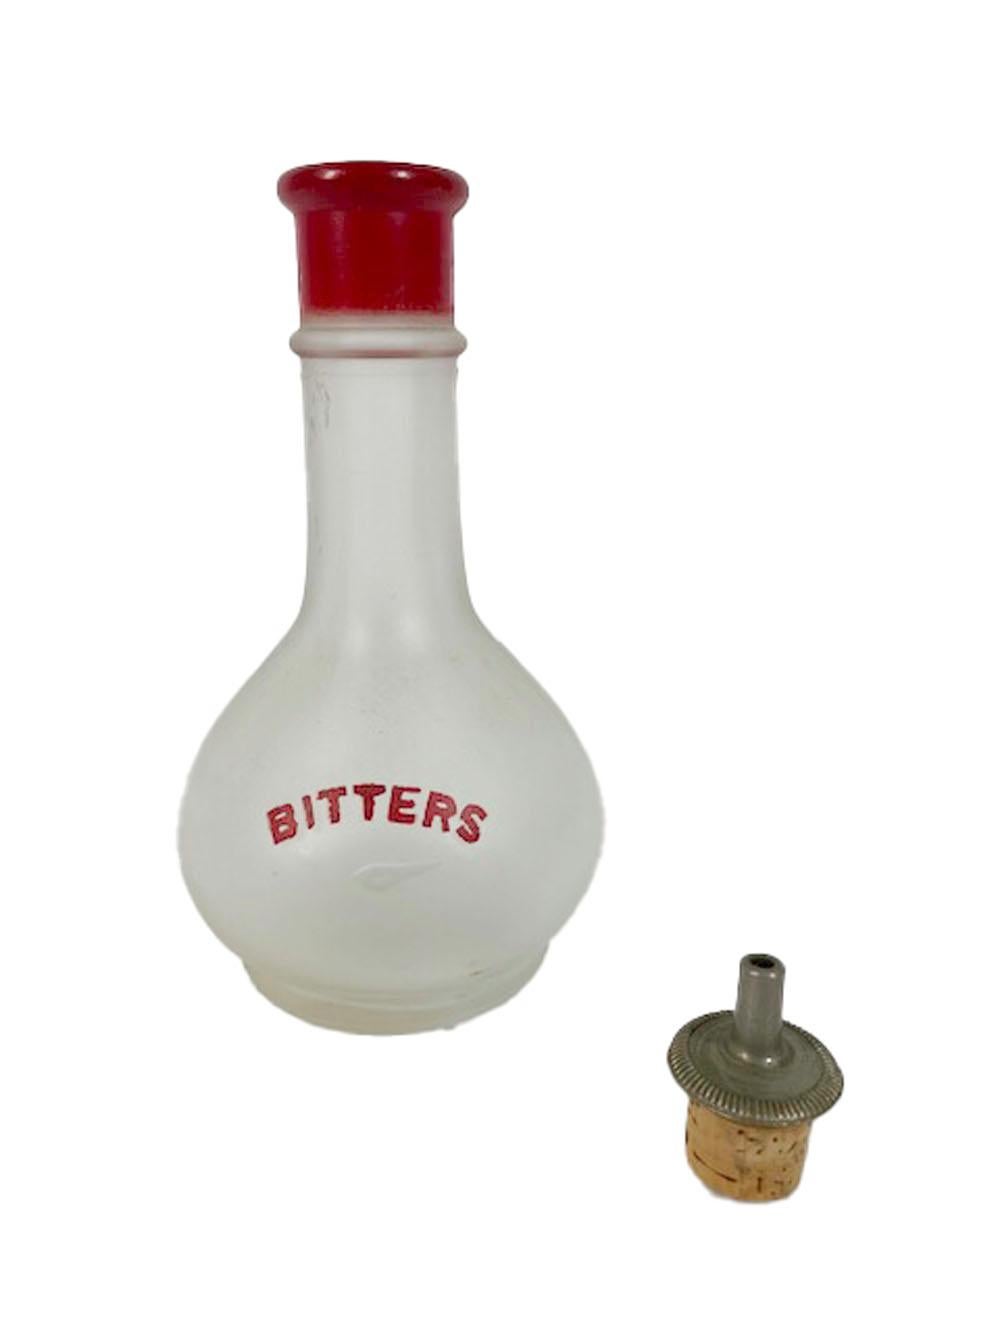 Art Deco bitters bottle by Hazel-Atlas with a cork and metal dasher stopper, the bottle of a ball-form base with long narrow neck of frosted glass with red collar and the word 